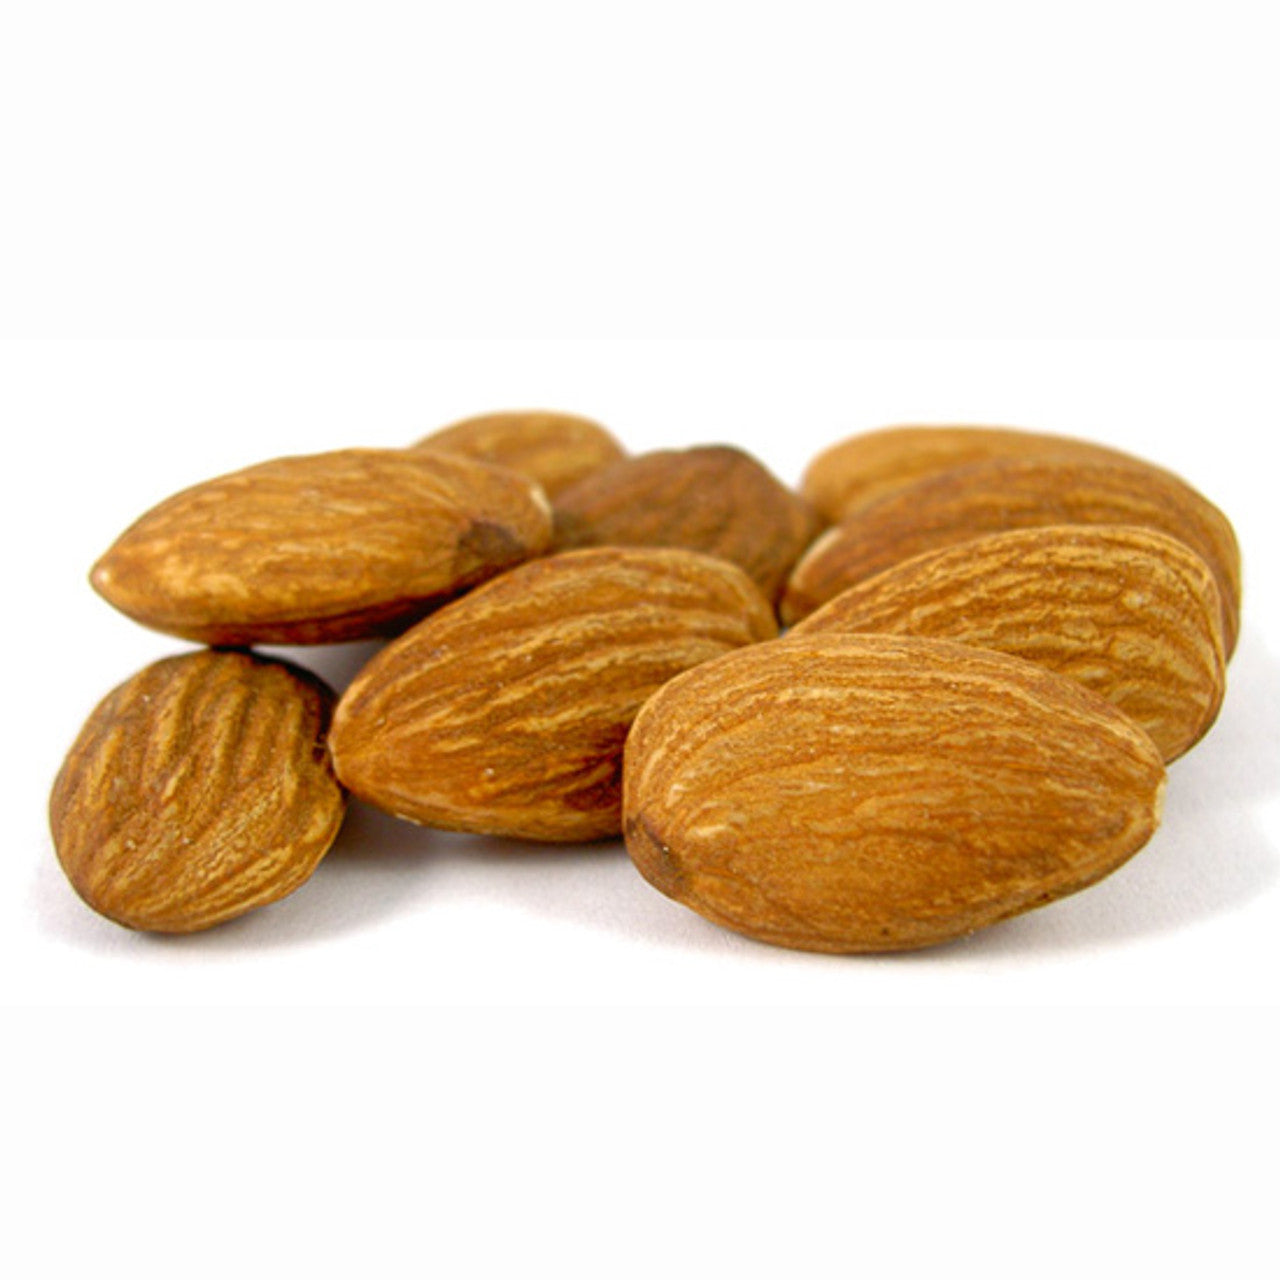 Unsalted Natural Almonds